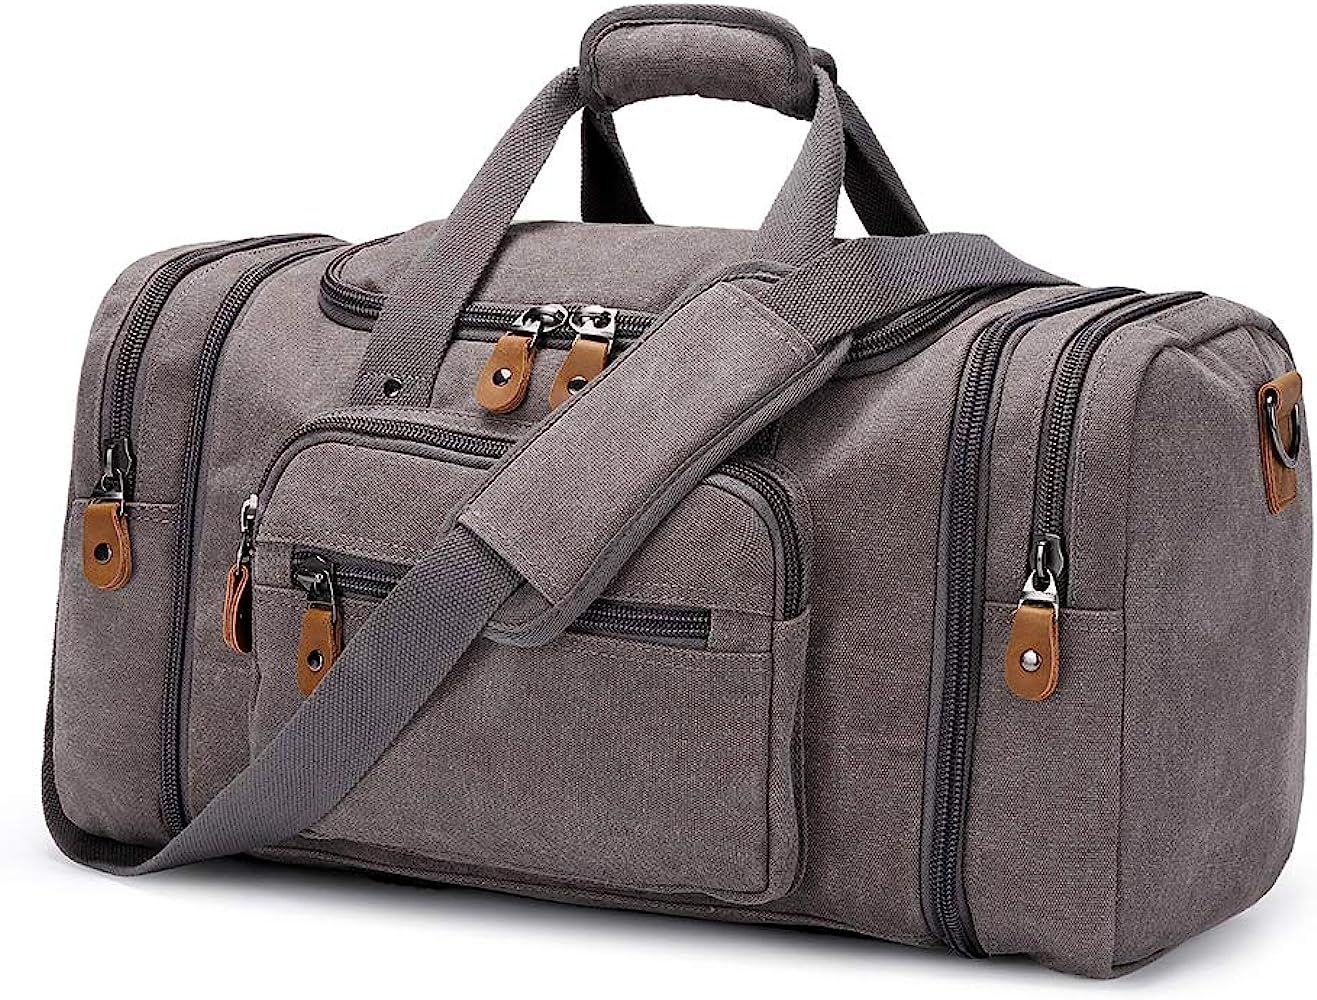 Gonex Canvas Duffle Bag for Travel, 60L Duffel Overnight Weekend Bag (Gray) | Amazon (US)